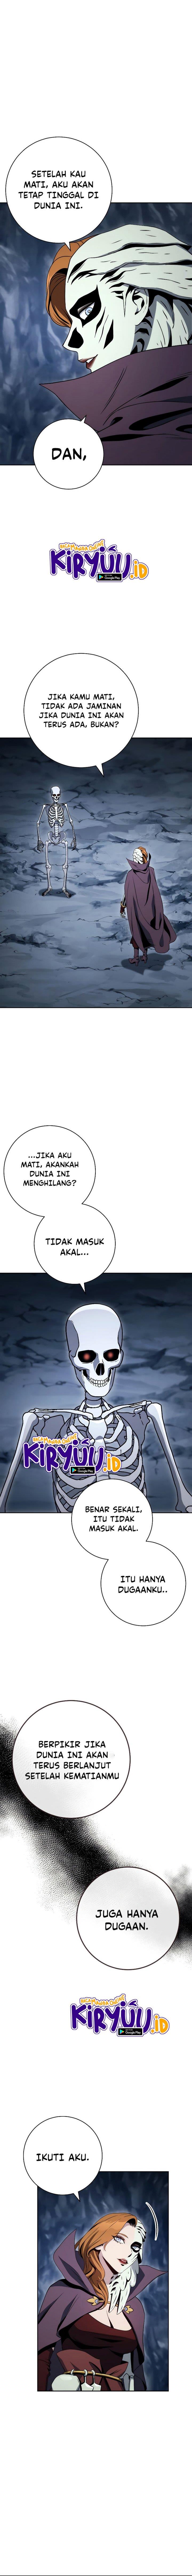 Skeleton Soldier Couldn’t Protect the Dungeon Chapter 206